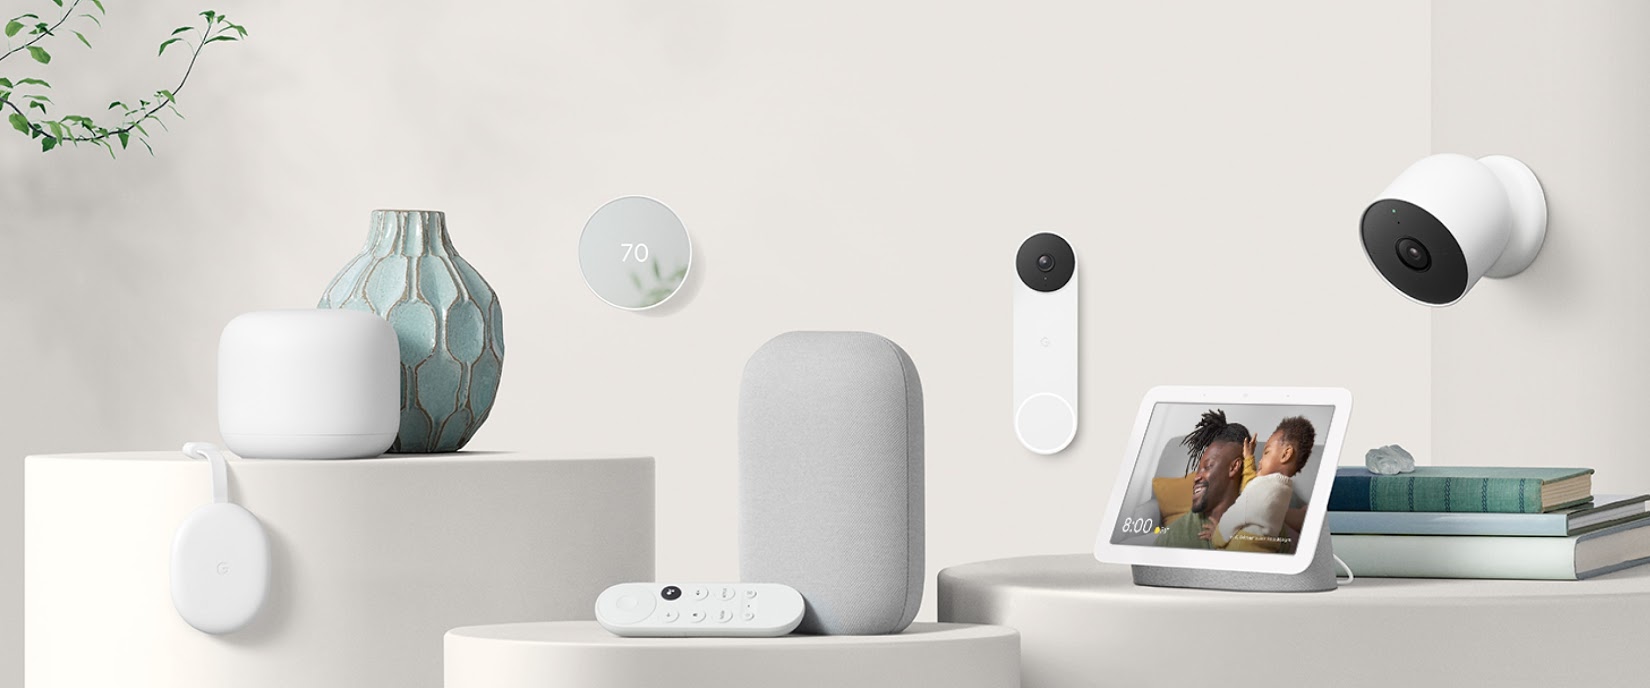 Google Store leaks 'Nest Doorbell' and new Nest Cams - 9to5Google